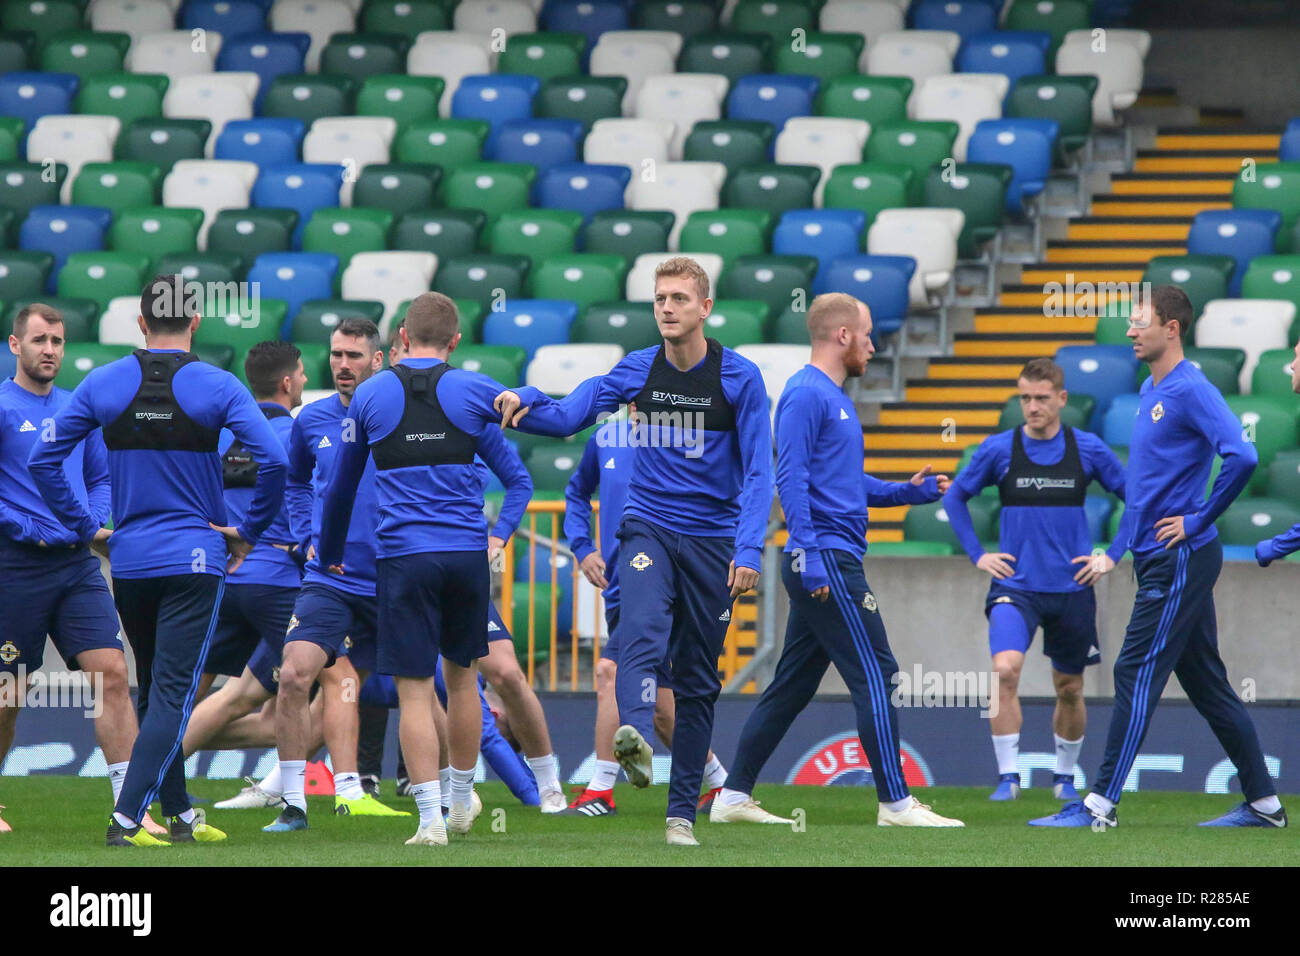 Windsor Park, Belfast, Northern Ireland.17 November 2018. Northern Ireland training in Belfast this morning ahead of their UEFA Nations League game against Austria tomorrow night in the stadium. George Saville (centre). Credit: David Hunter/Alamy Live News. Stock Photo